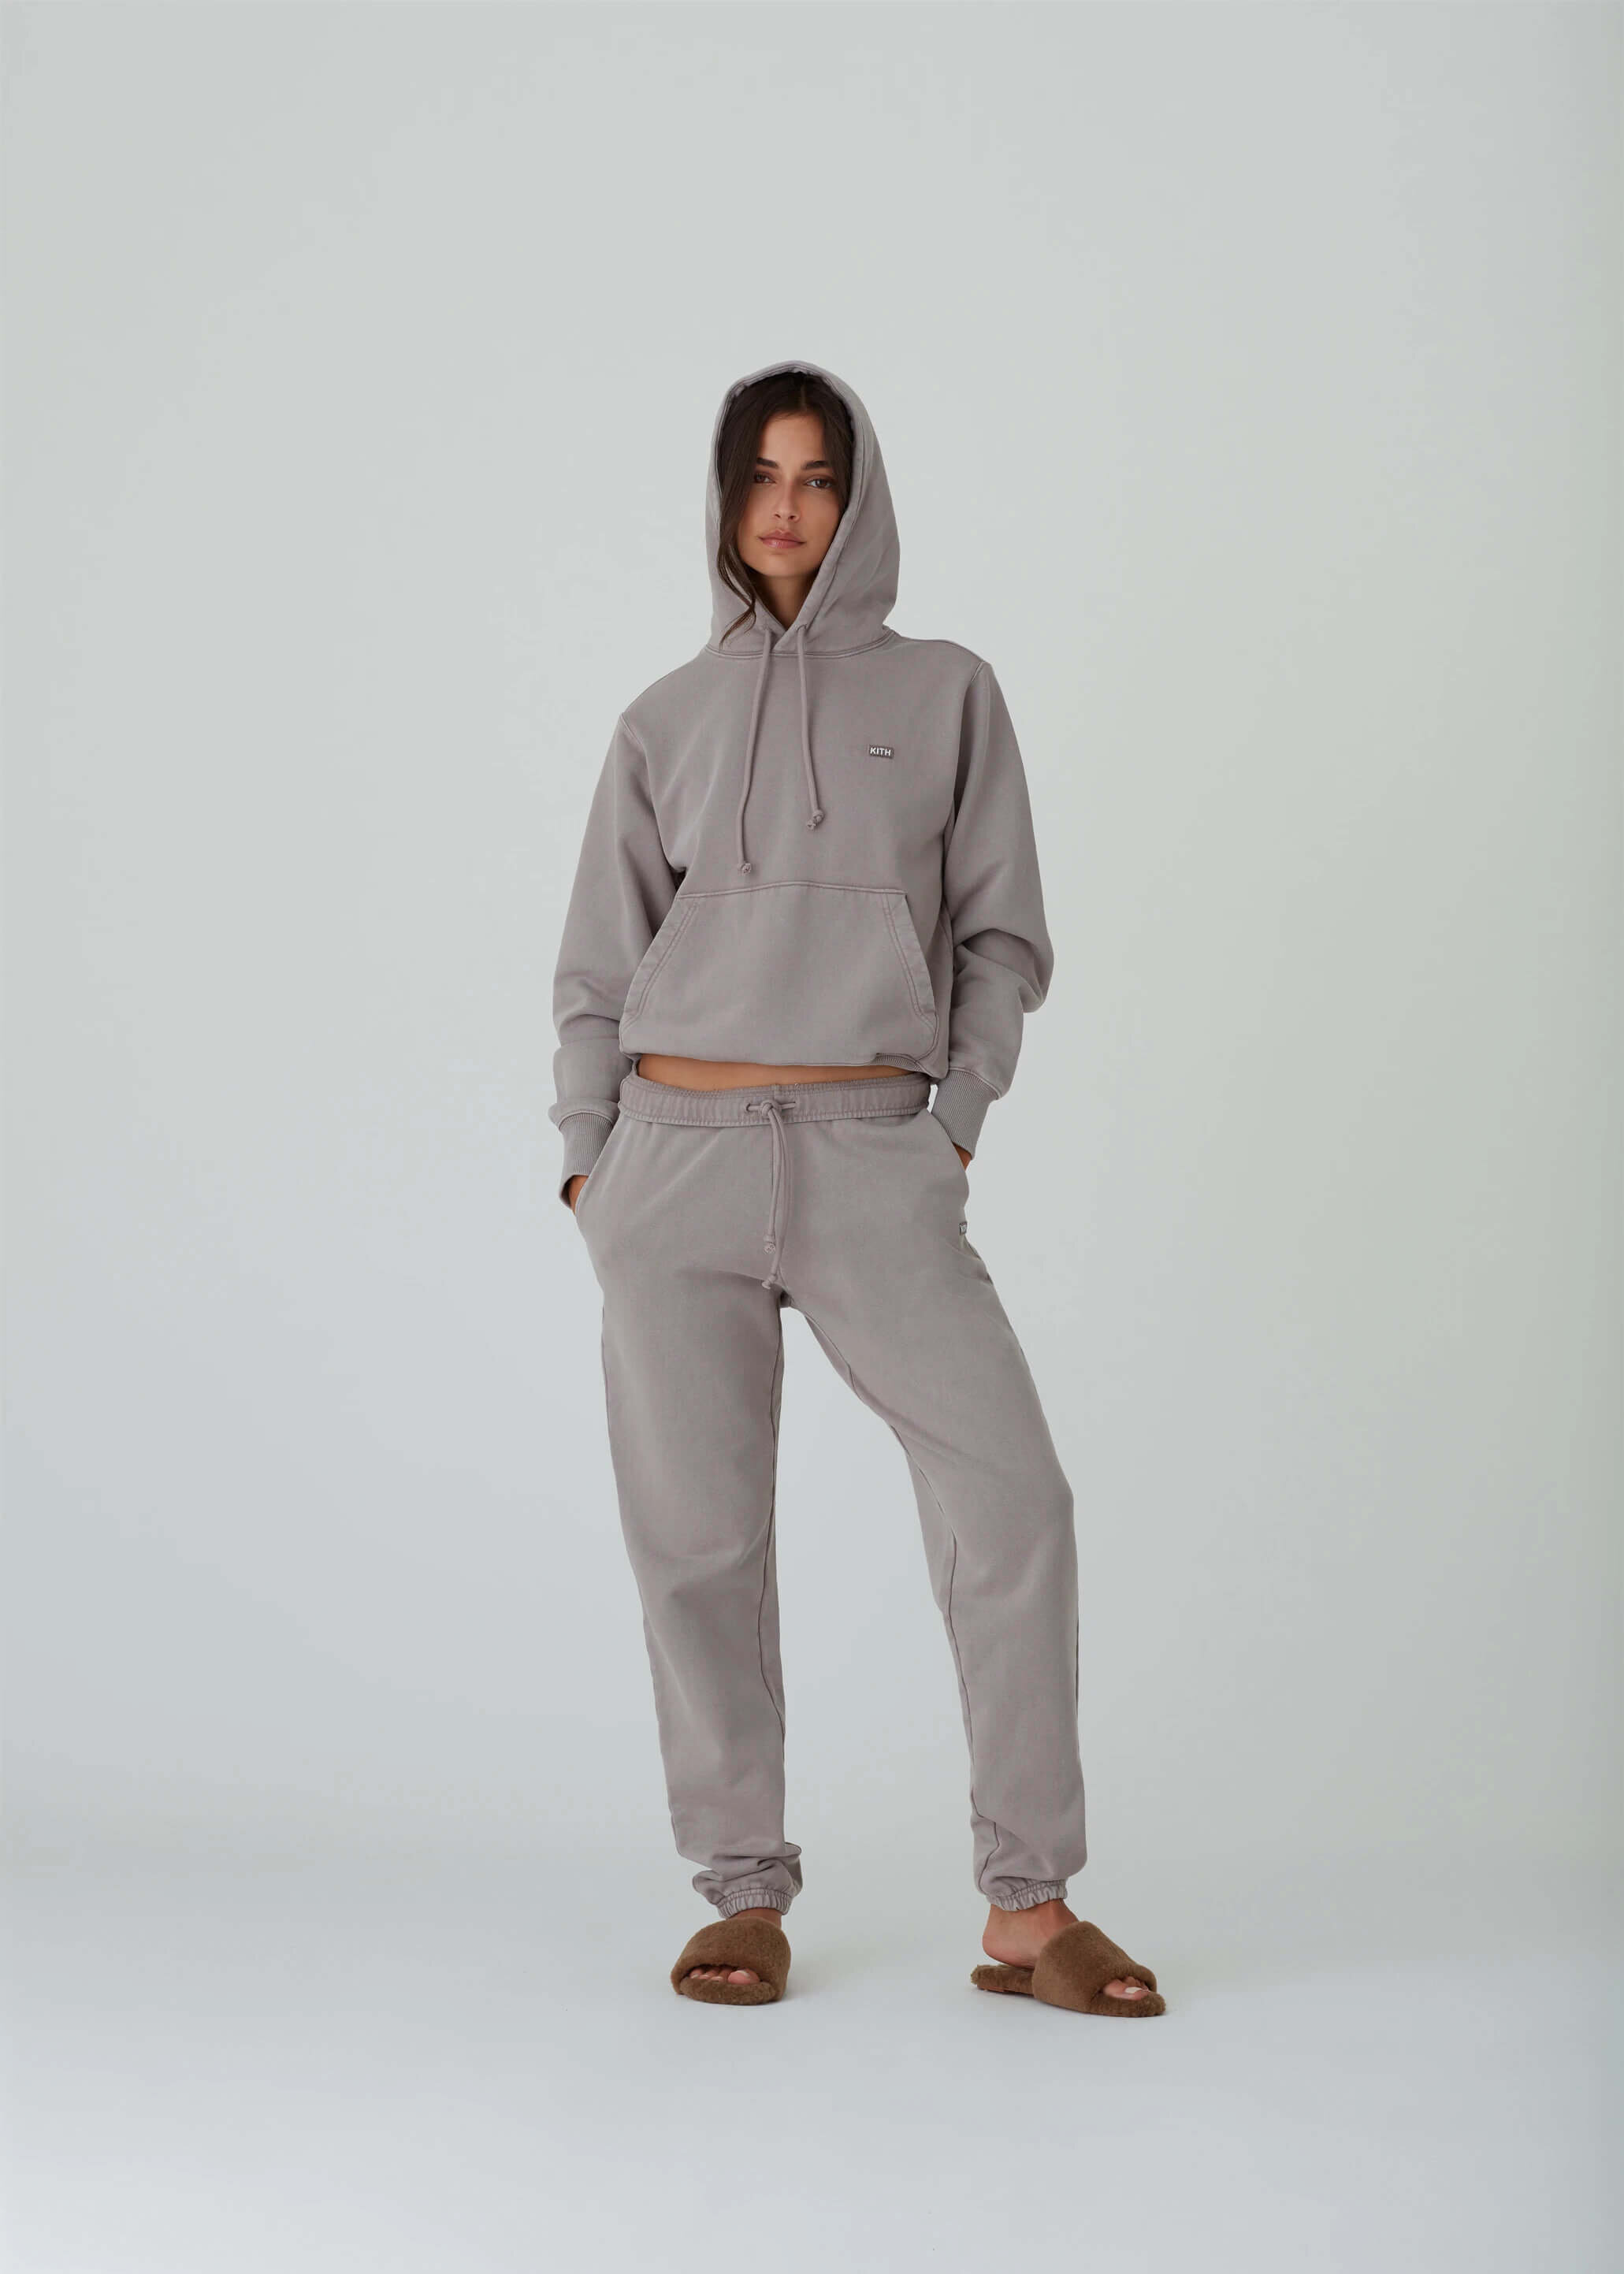 CNK-Kith-Spring-1-2021-Collection-Look-15.jpeg